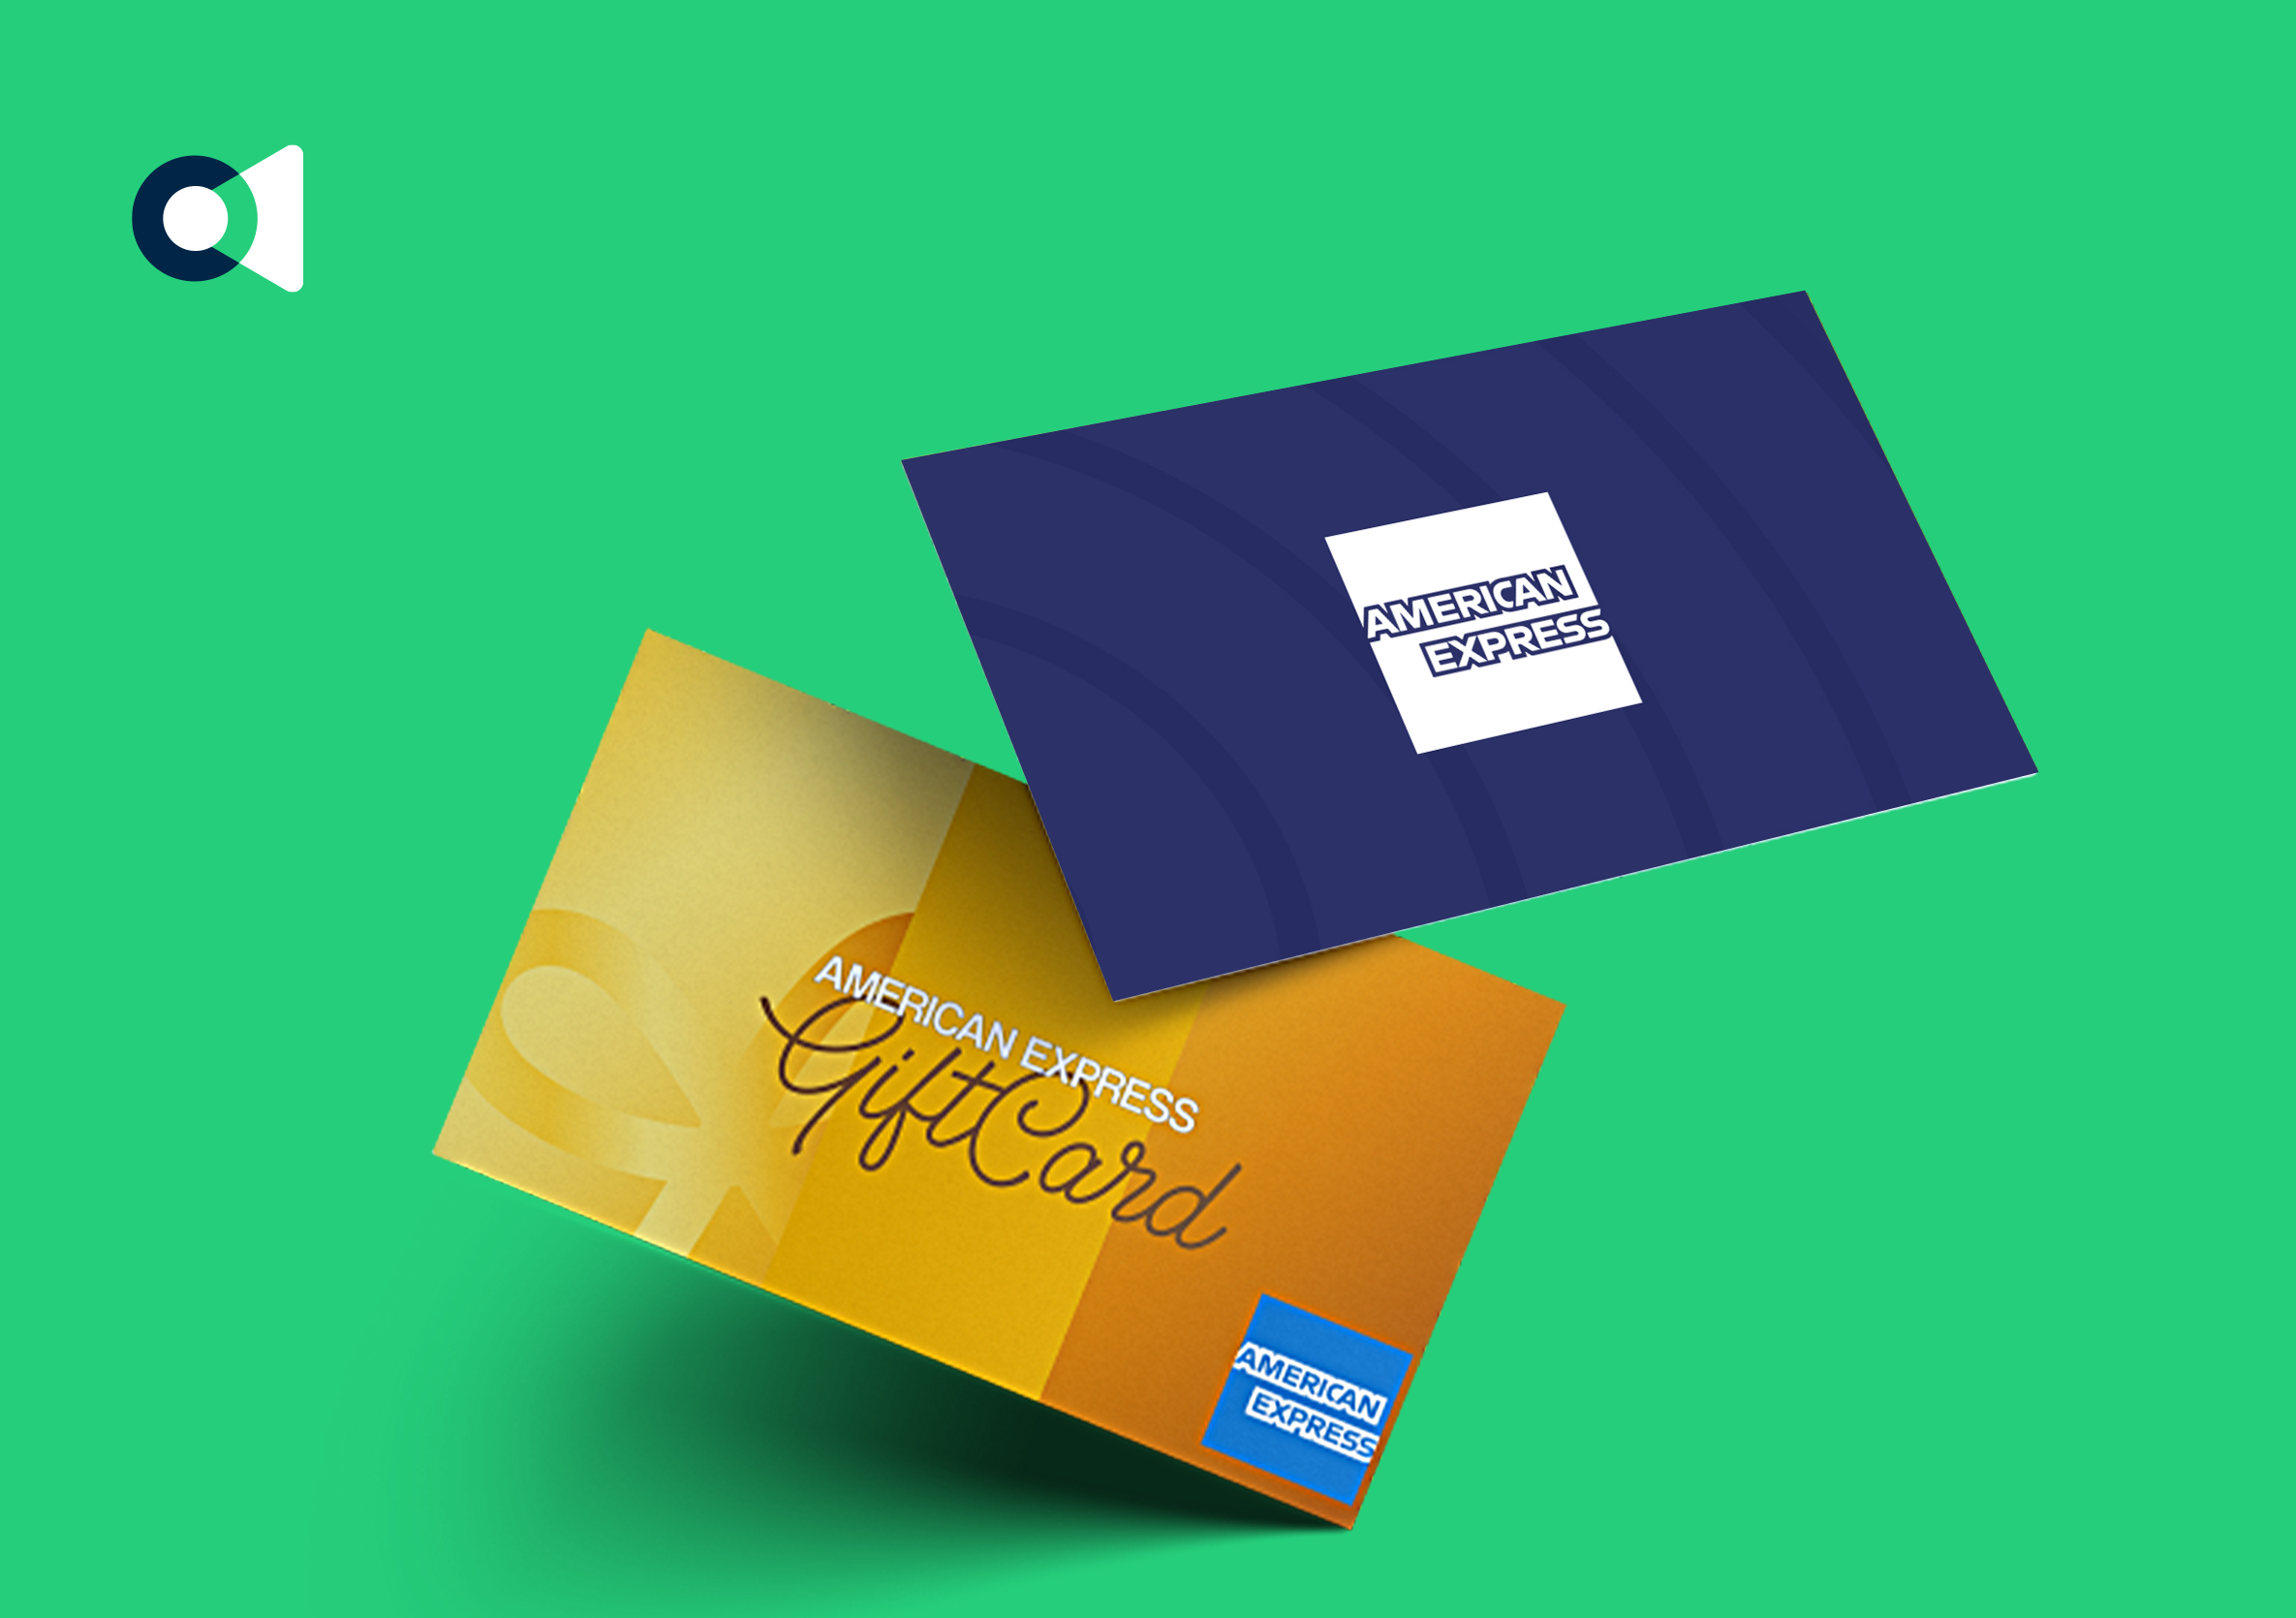 About AMEX And AMEX Gift Cards